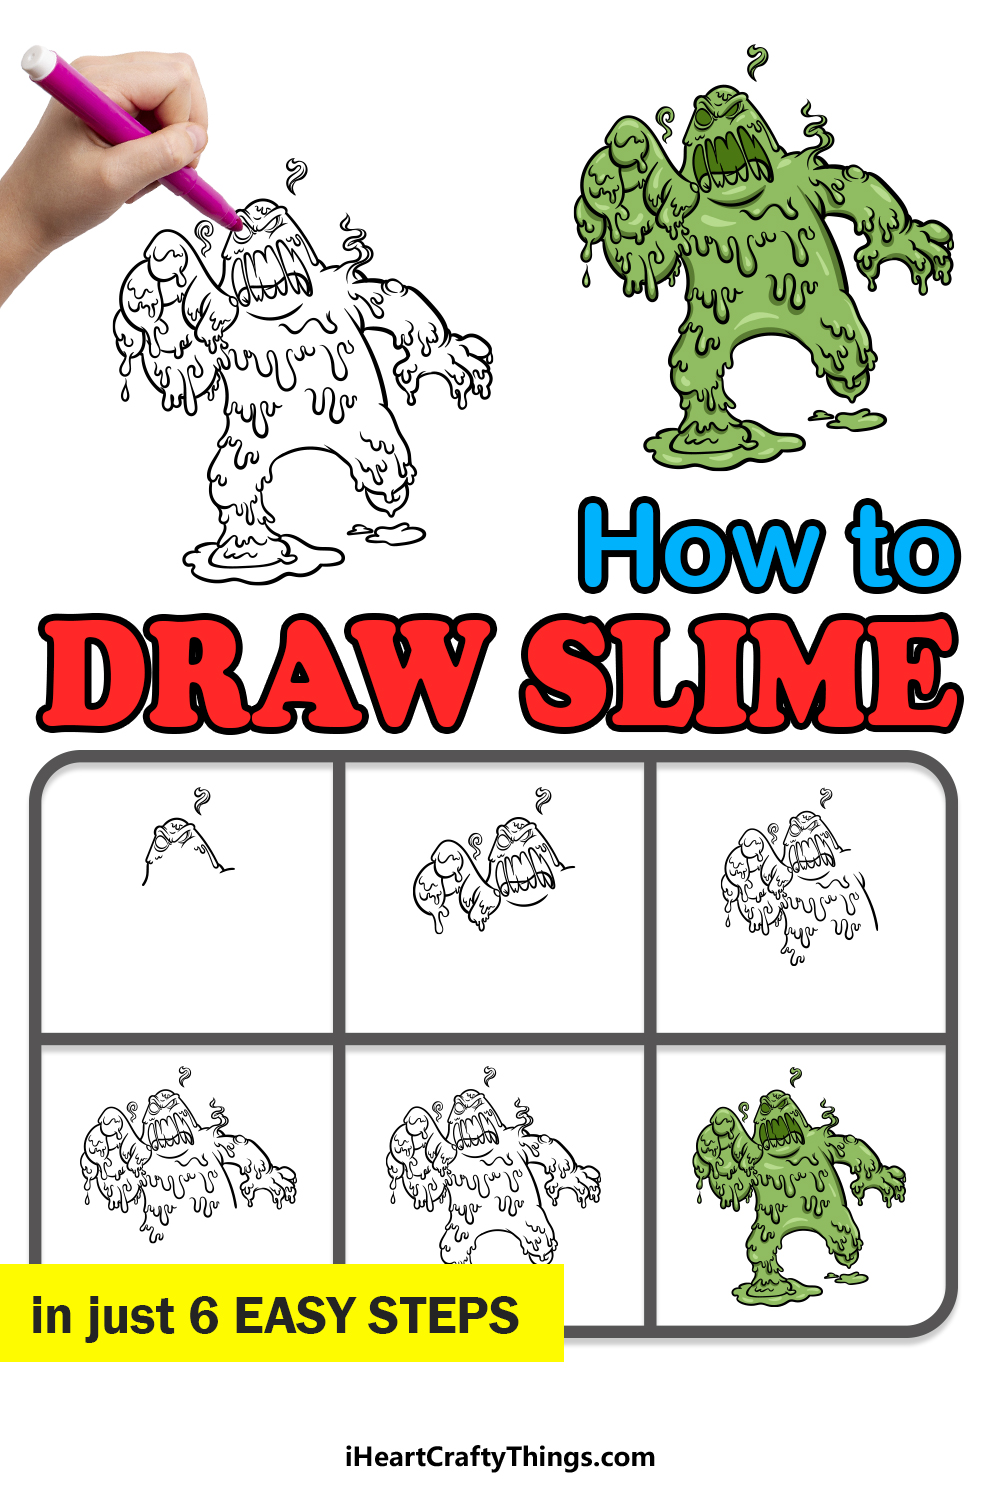 how to draw Slime in 6 easy steps